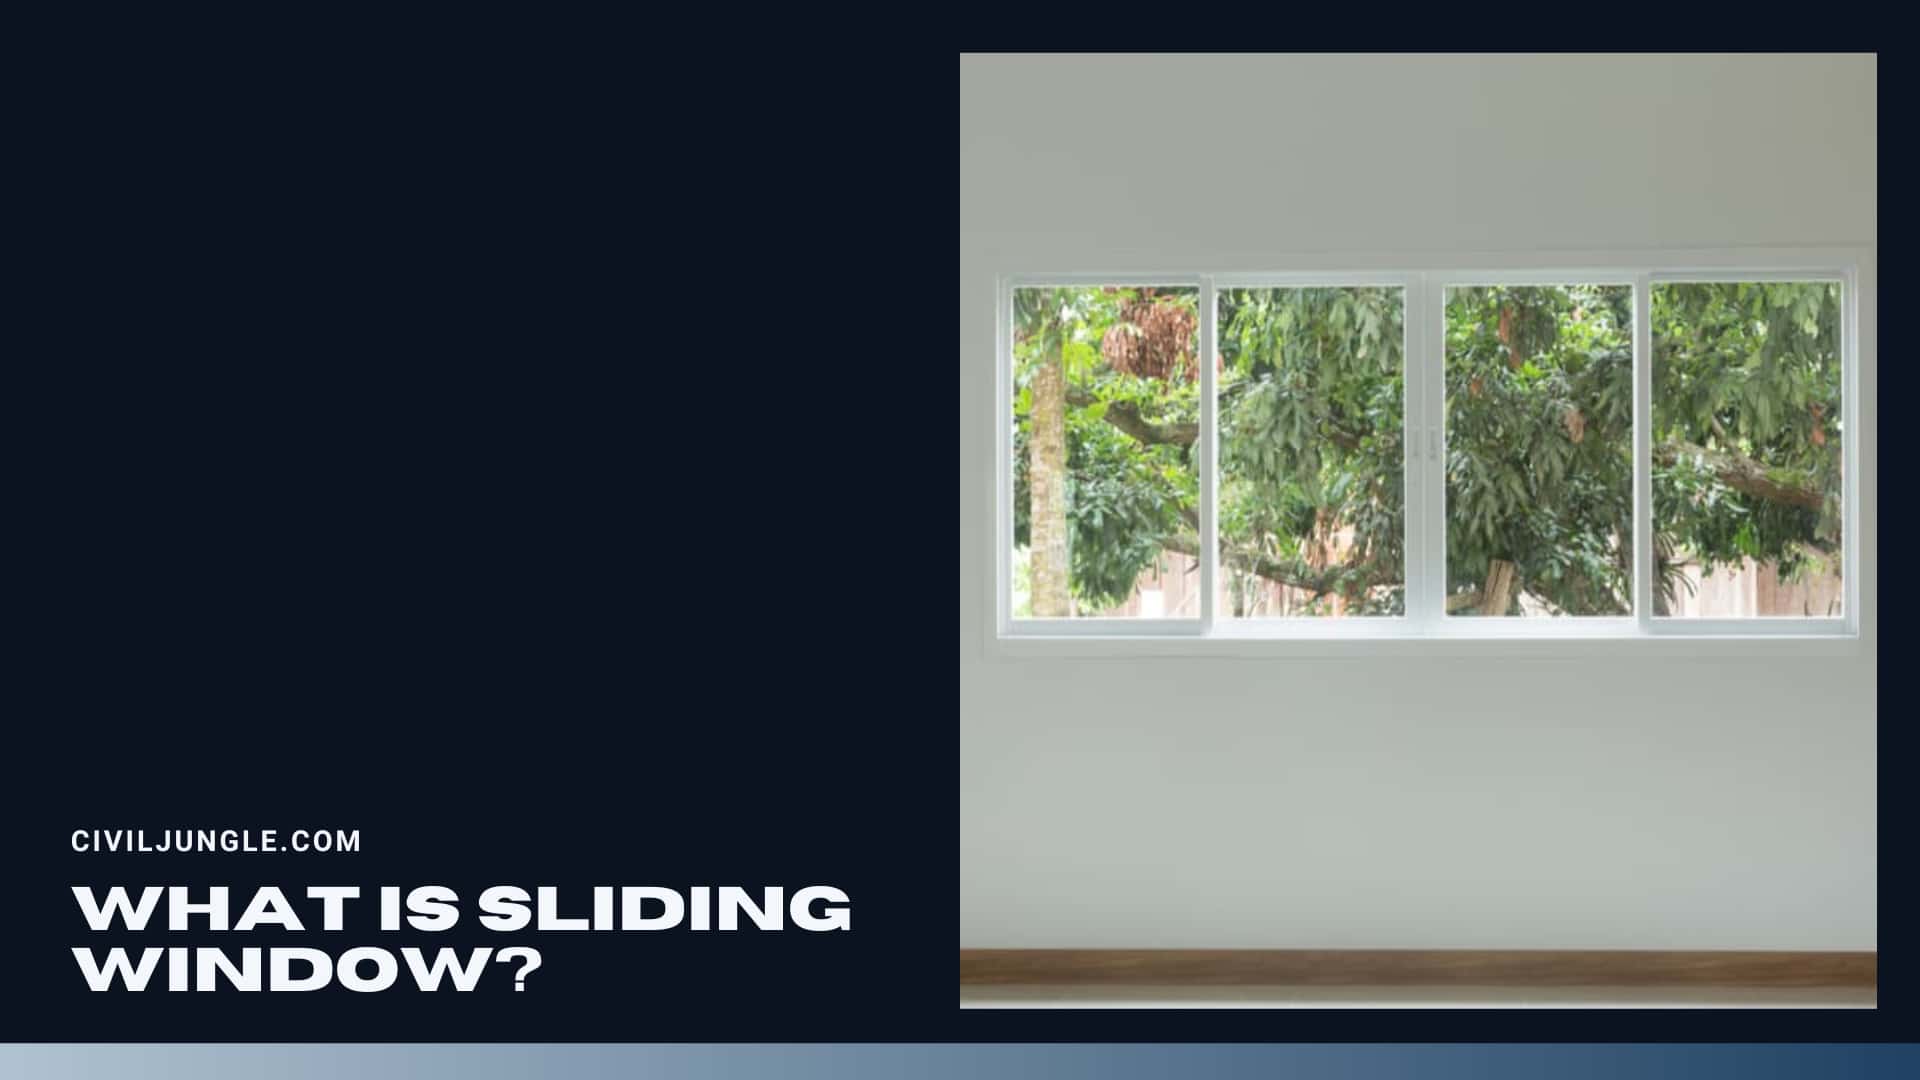 What Is Sliding Window?